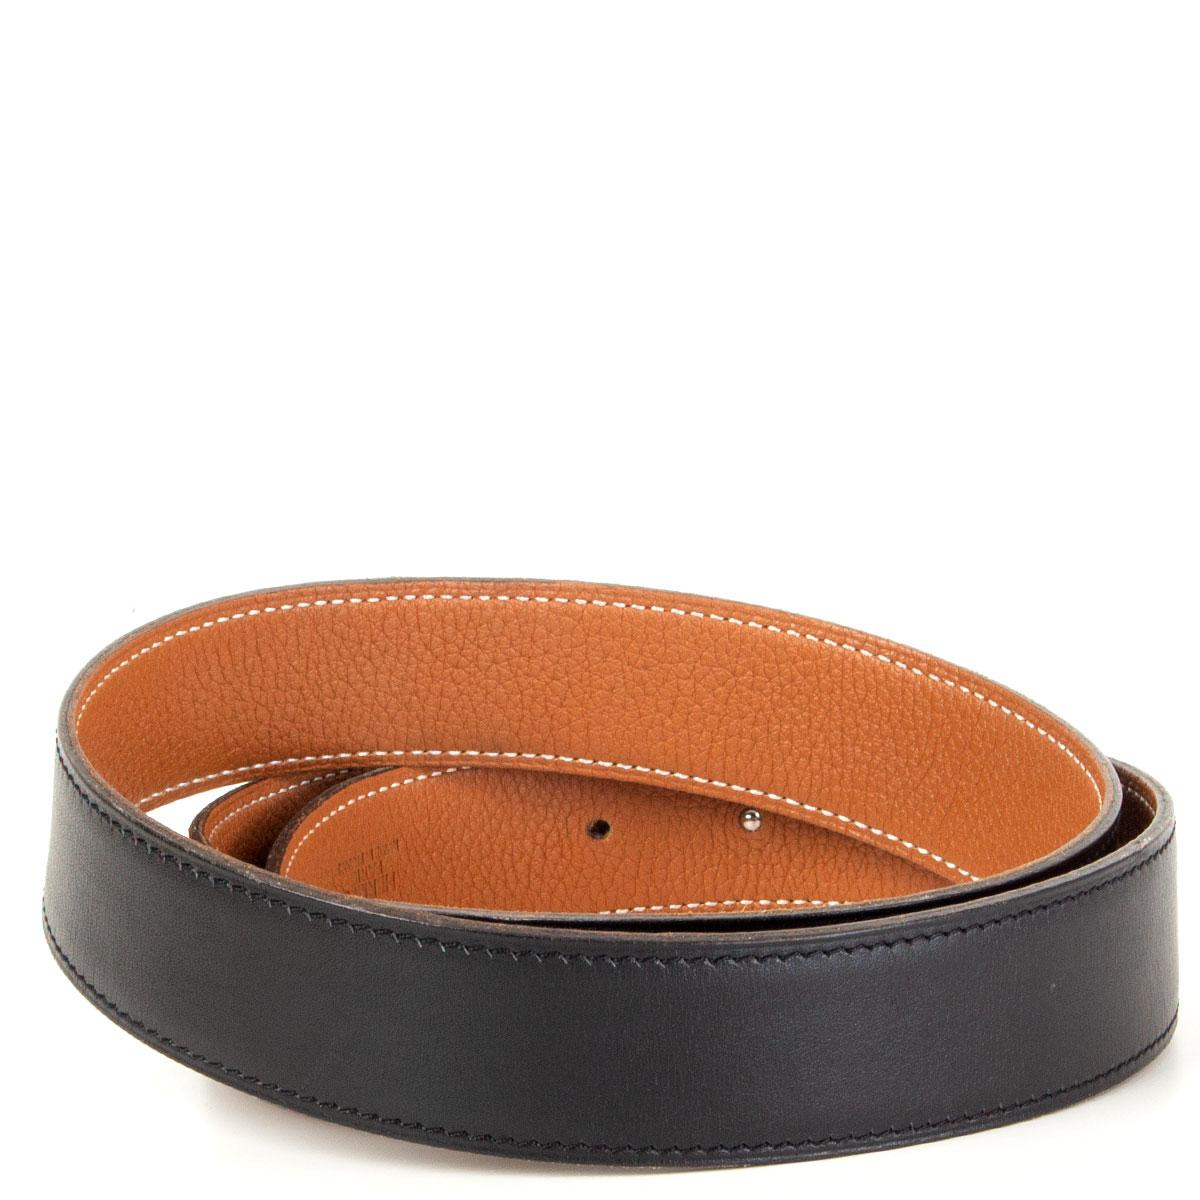 100% authentic Hermès '5382 H' buckle reversible 32mm belt in Noir/Gold (black/camel) Box and Togo leather with brushed palladium (silver-tone) buckle. Has been worn with some dark scratches on the buckle. Overall condition is very good.